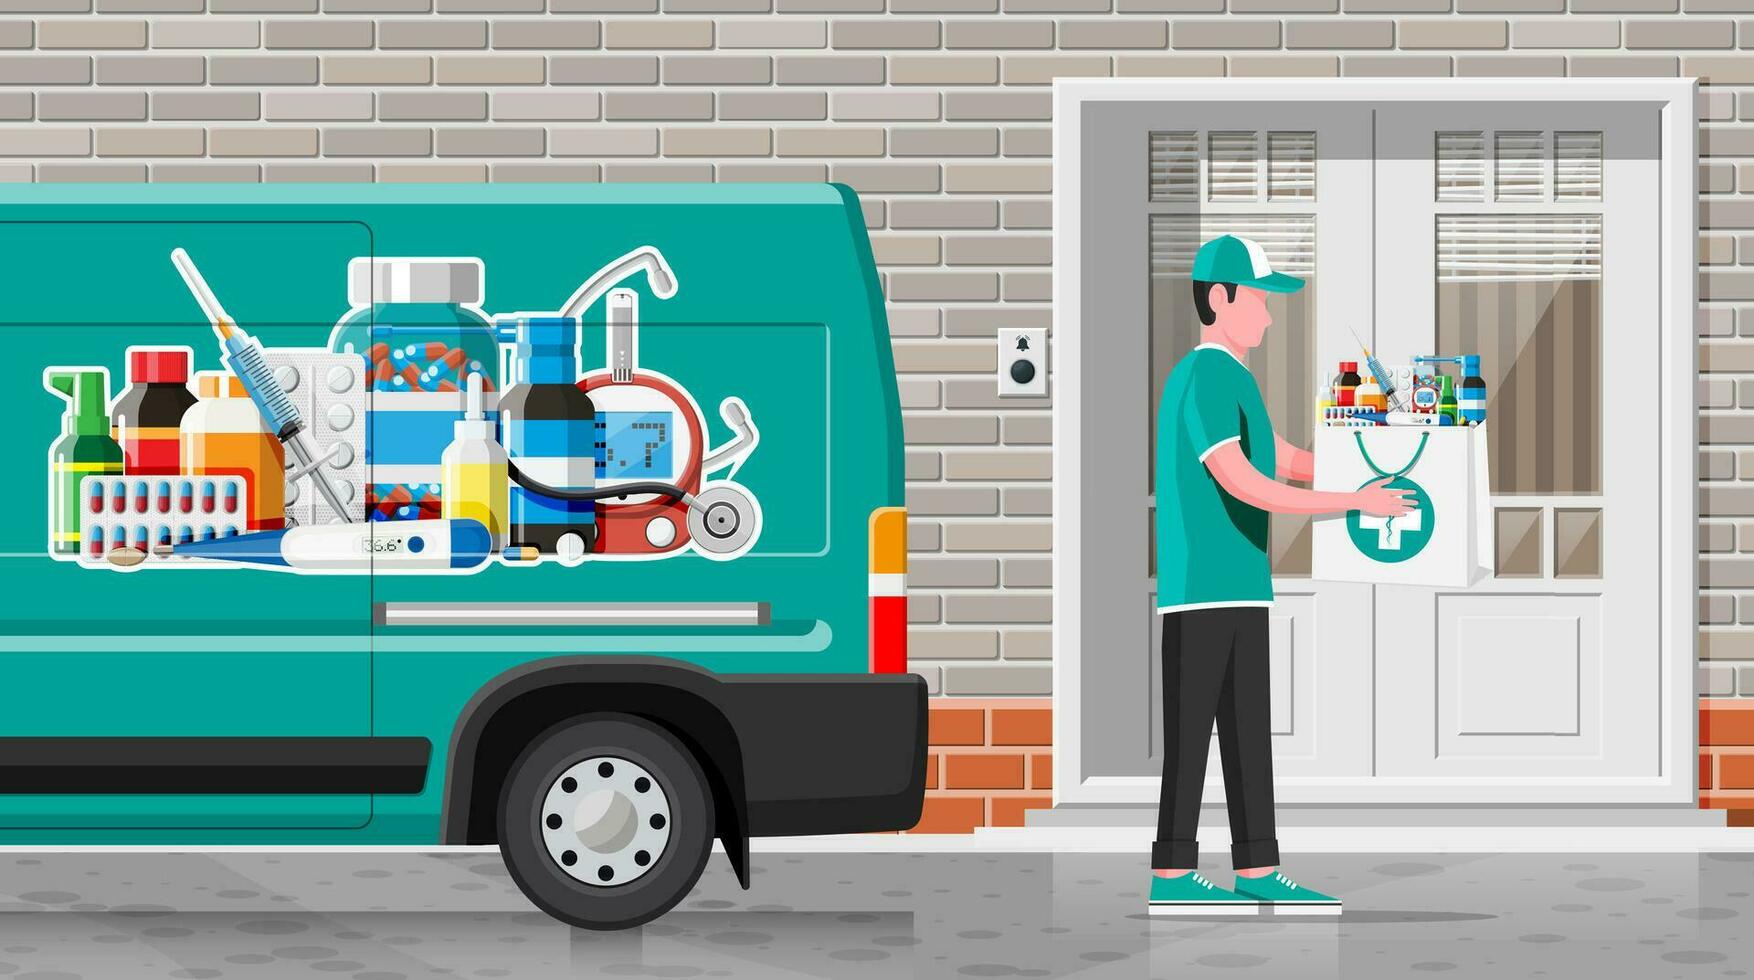 Van for delivery pharmaceutical drugs. Courier with bag. Green drugstore truck. Internet pharmacy online order. Medical assistance, help, support online. Health care. Vector illustration in flat style